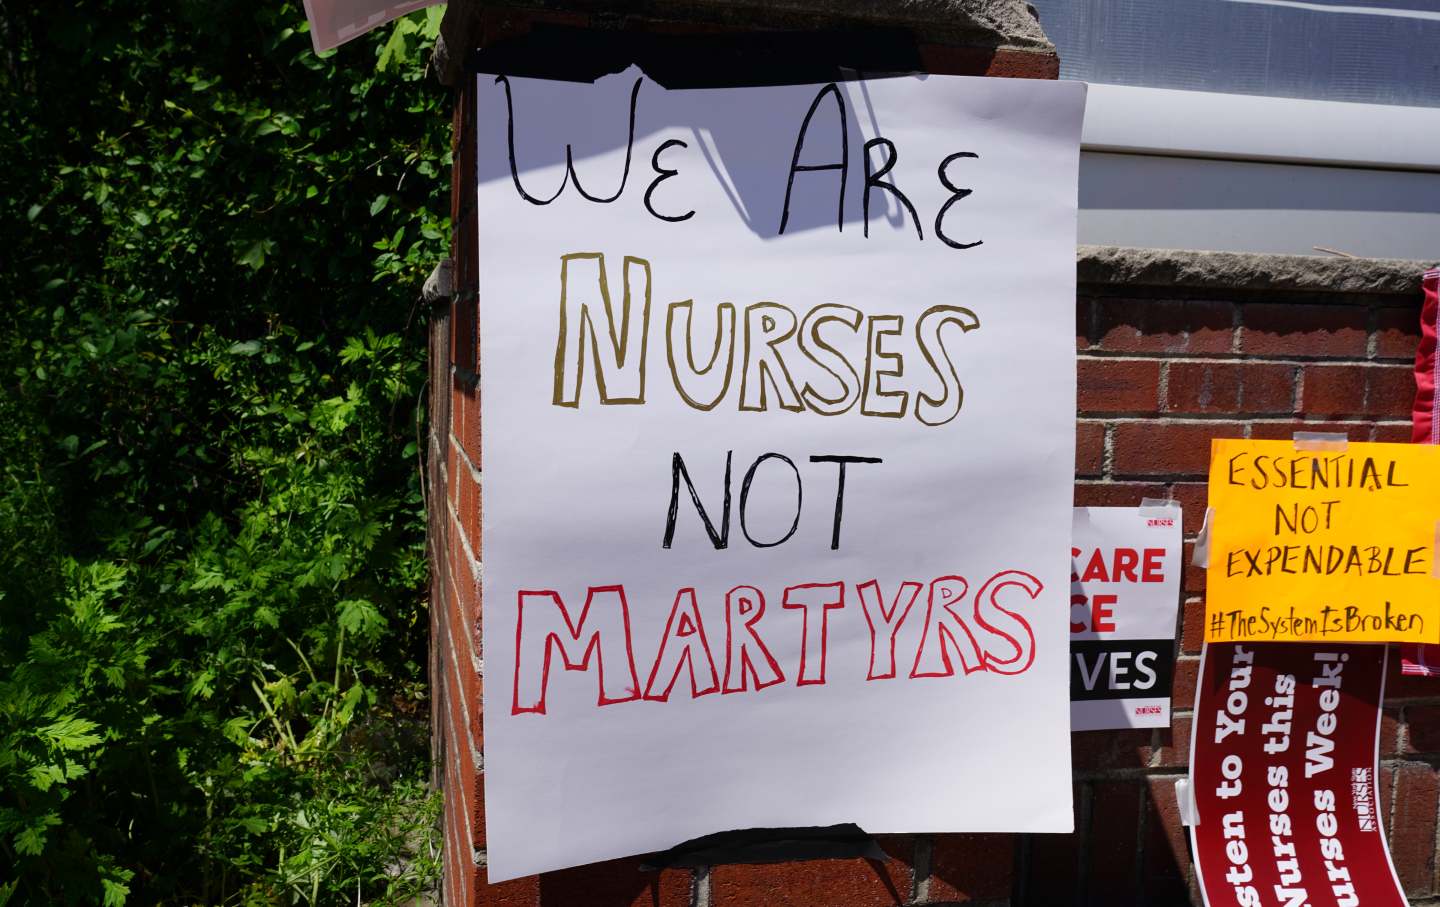 One Hospital System’s Response to Covid-19? Union-Busting.